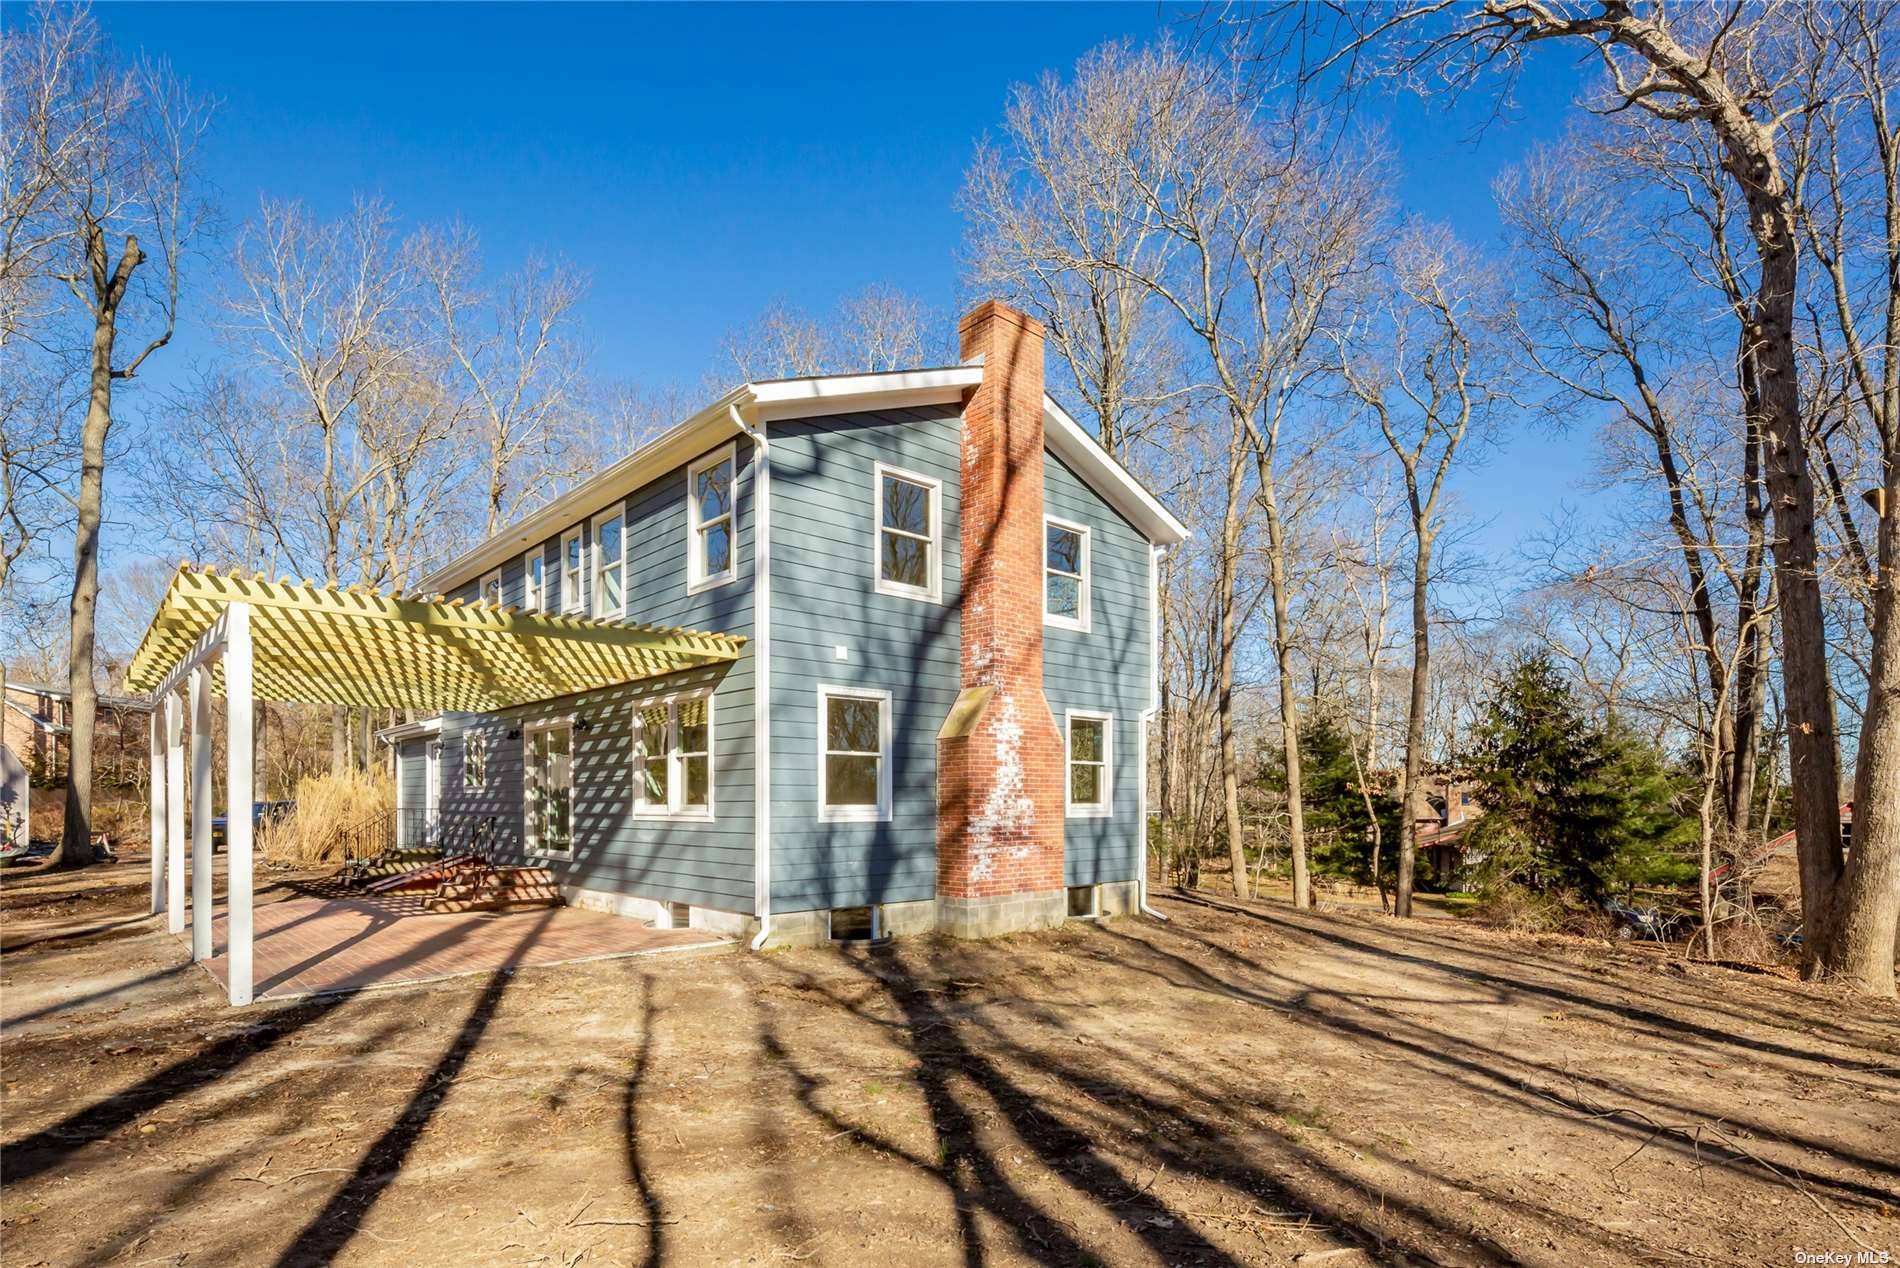 Situated on 1. 26 acres and recently renovated is a 1990 sq.